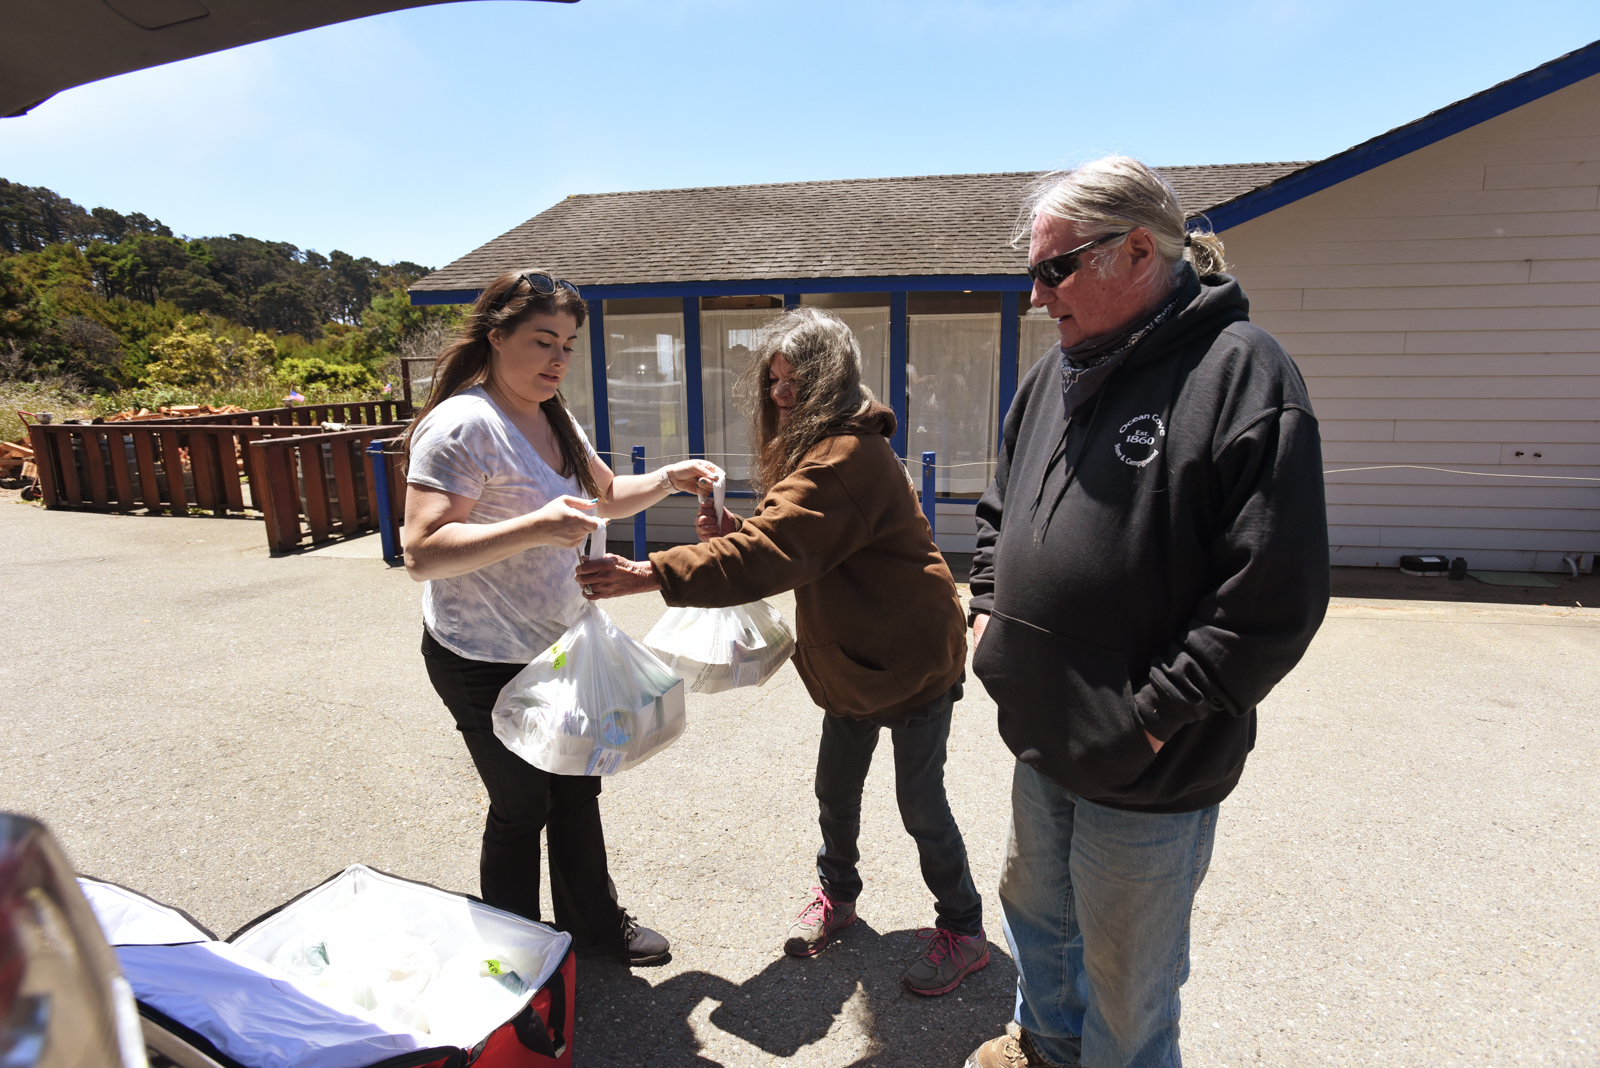 Elder community members picking up his food from a young lady holding bags of food.